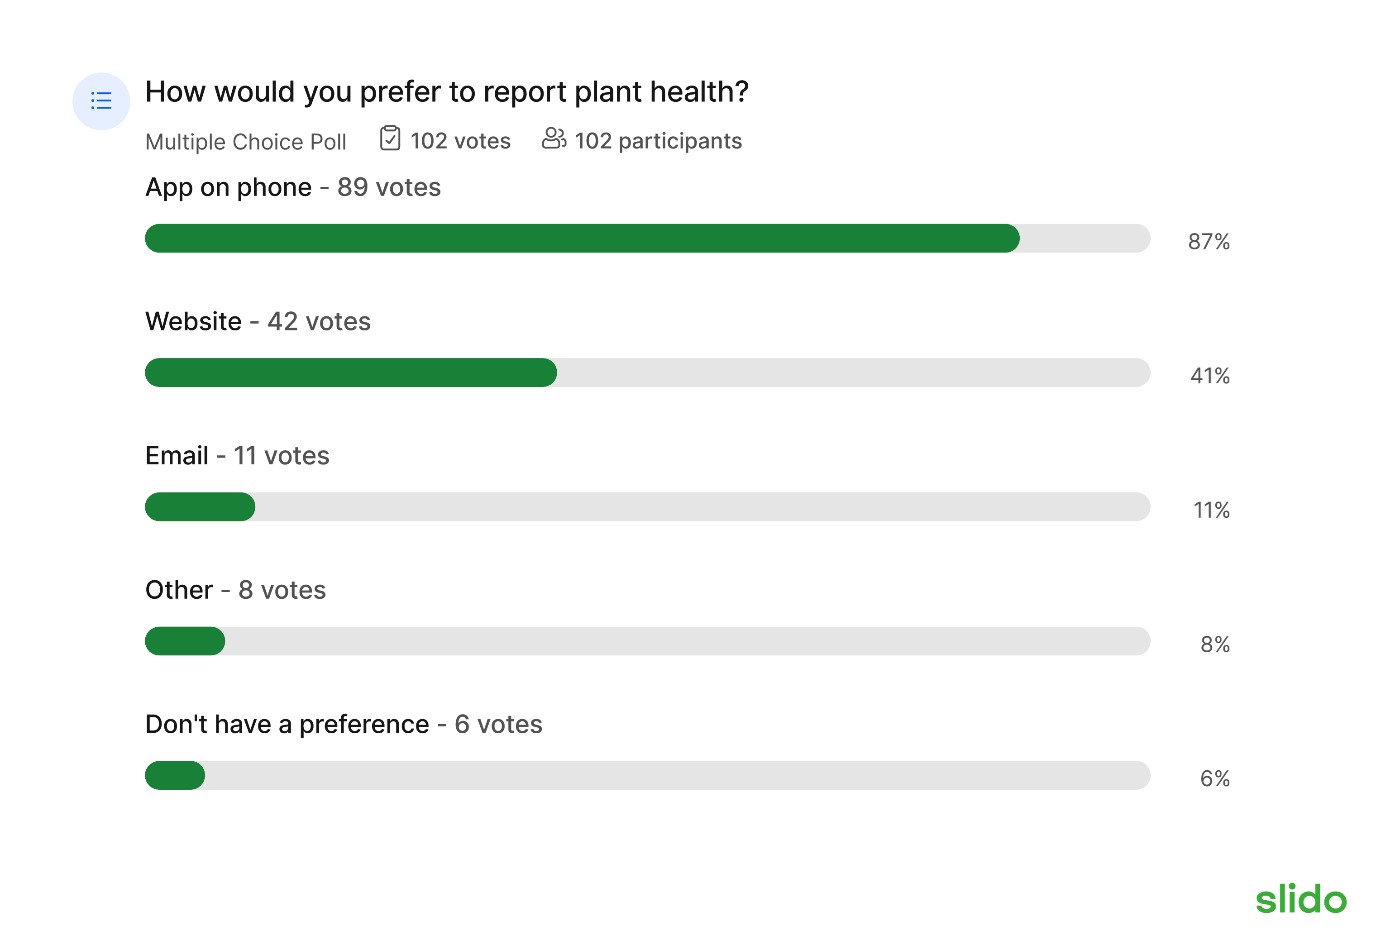 Survey results for how participants ranked 5 different options for reporting plant health